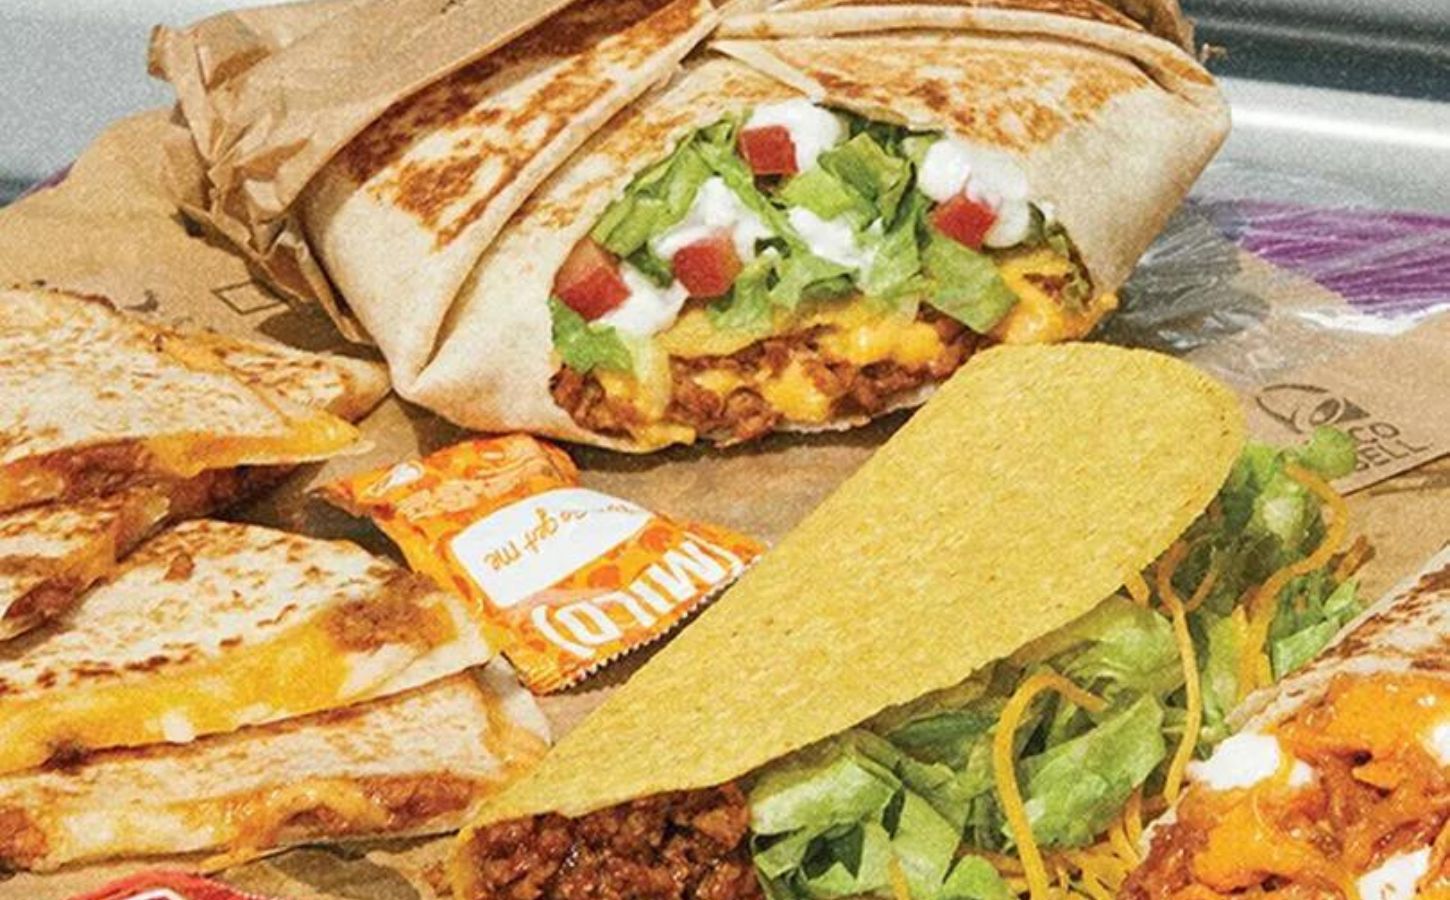 Taco Bell veggie options made from the chain's new plant-based meat